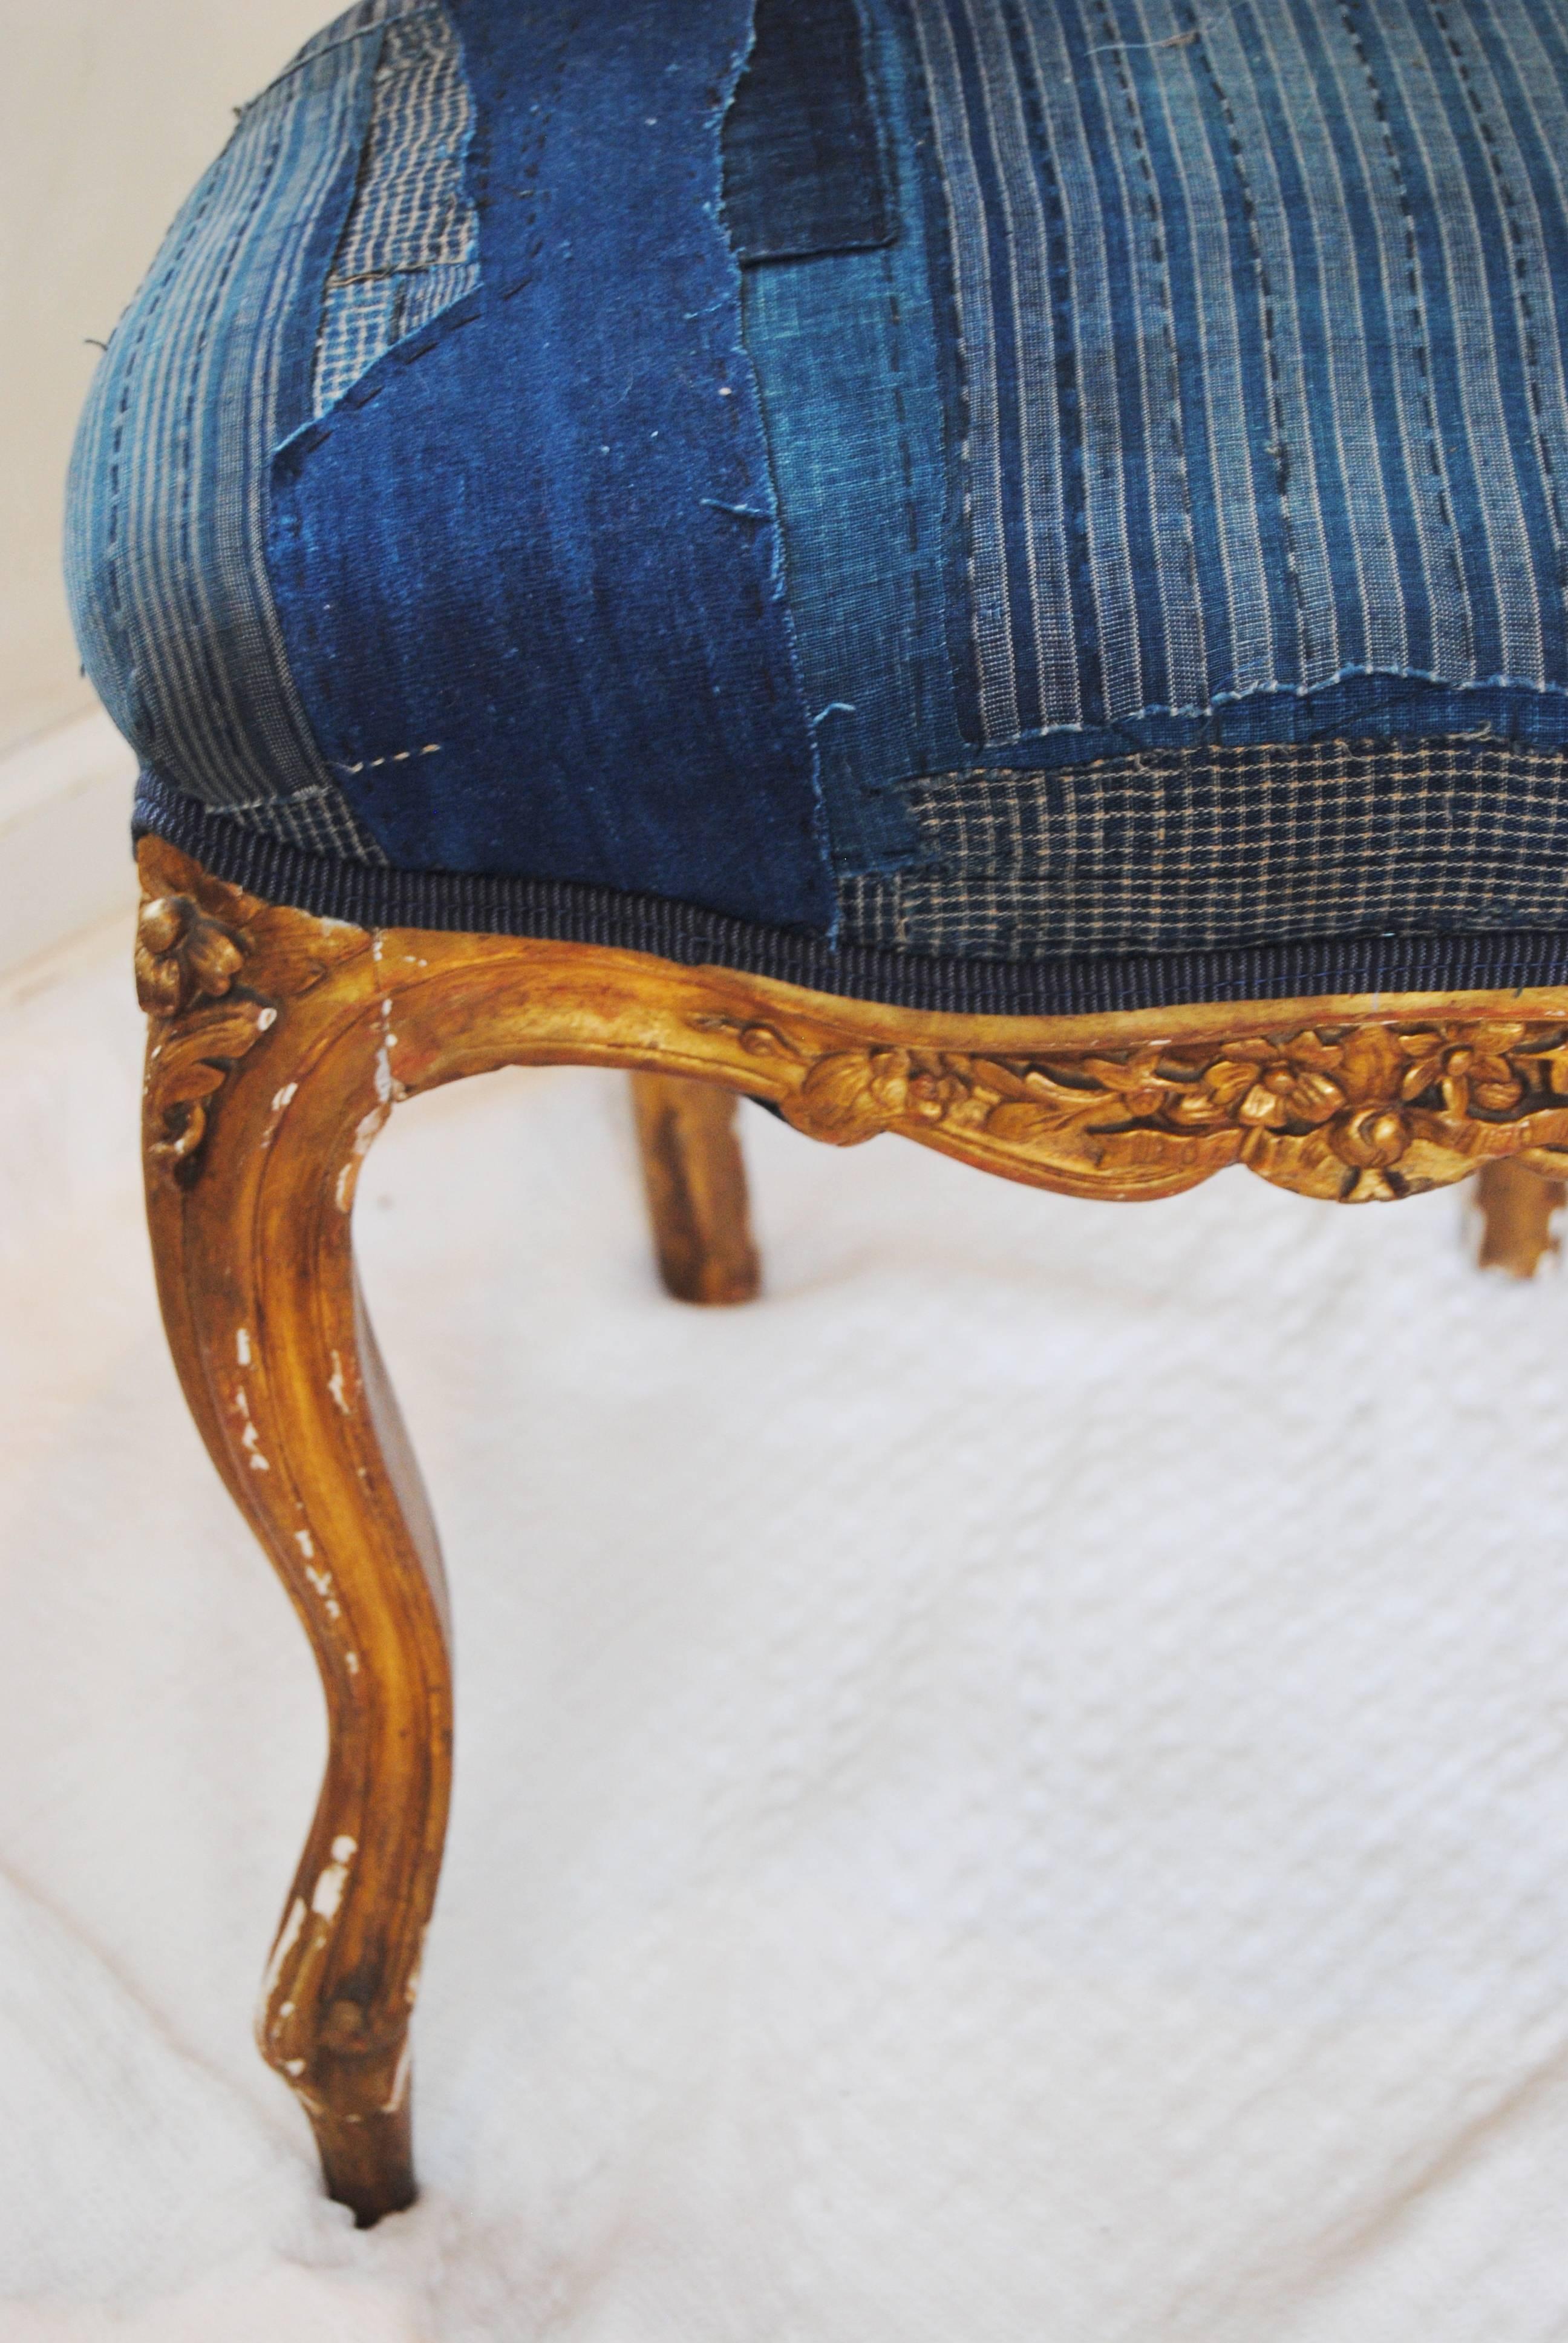 Cotton Antique French Gilt Chair Upholstered in an Antique Japanese Indigo Boro Textile For Sale